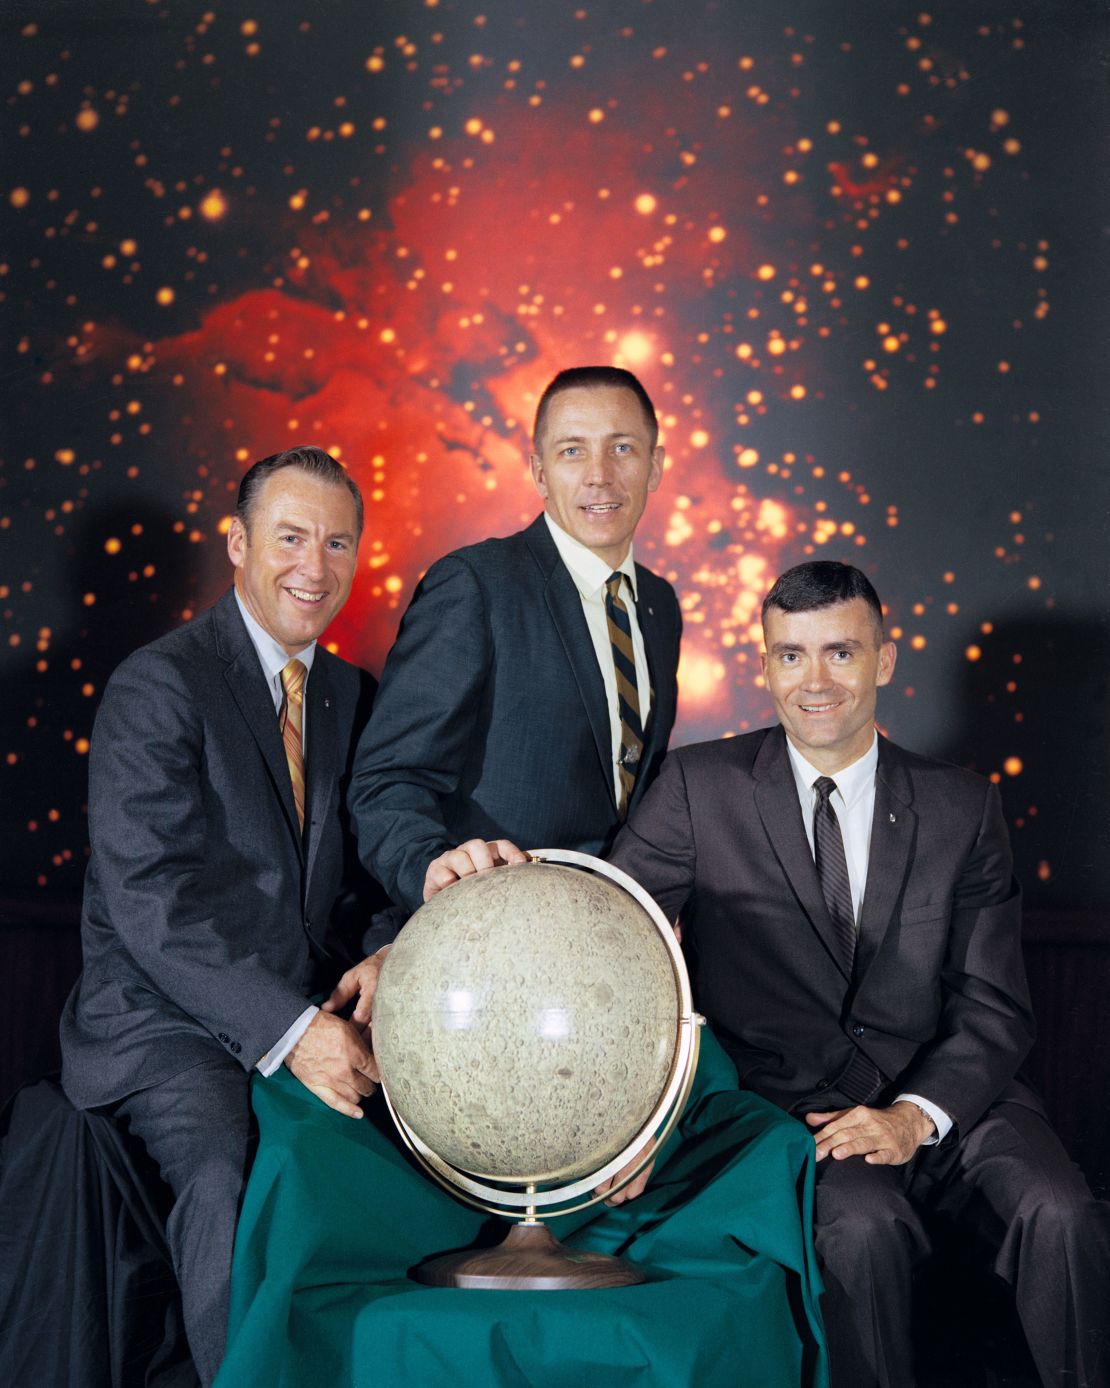 James A. Lovell Jr., commander; John L. Swigert Jr., command module pilot; and Fred W. Haise Jr., lunar module pilot (left to right) took their crew photo after returning from the mission. 